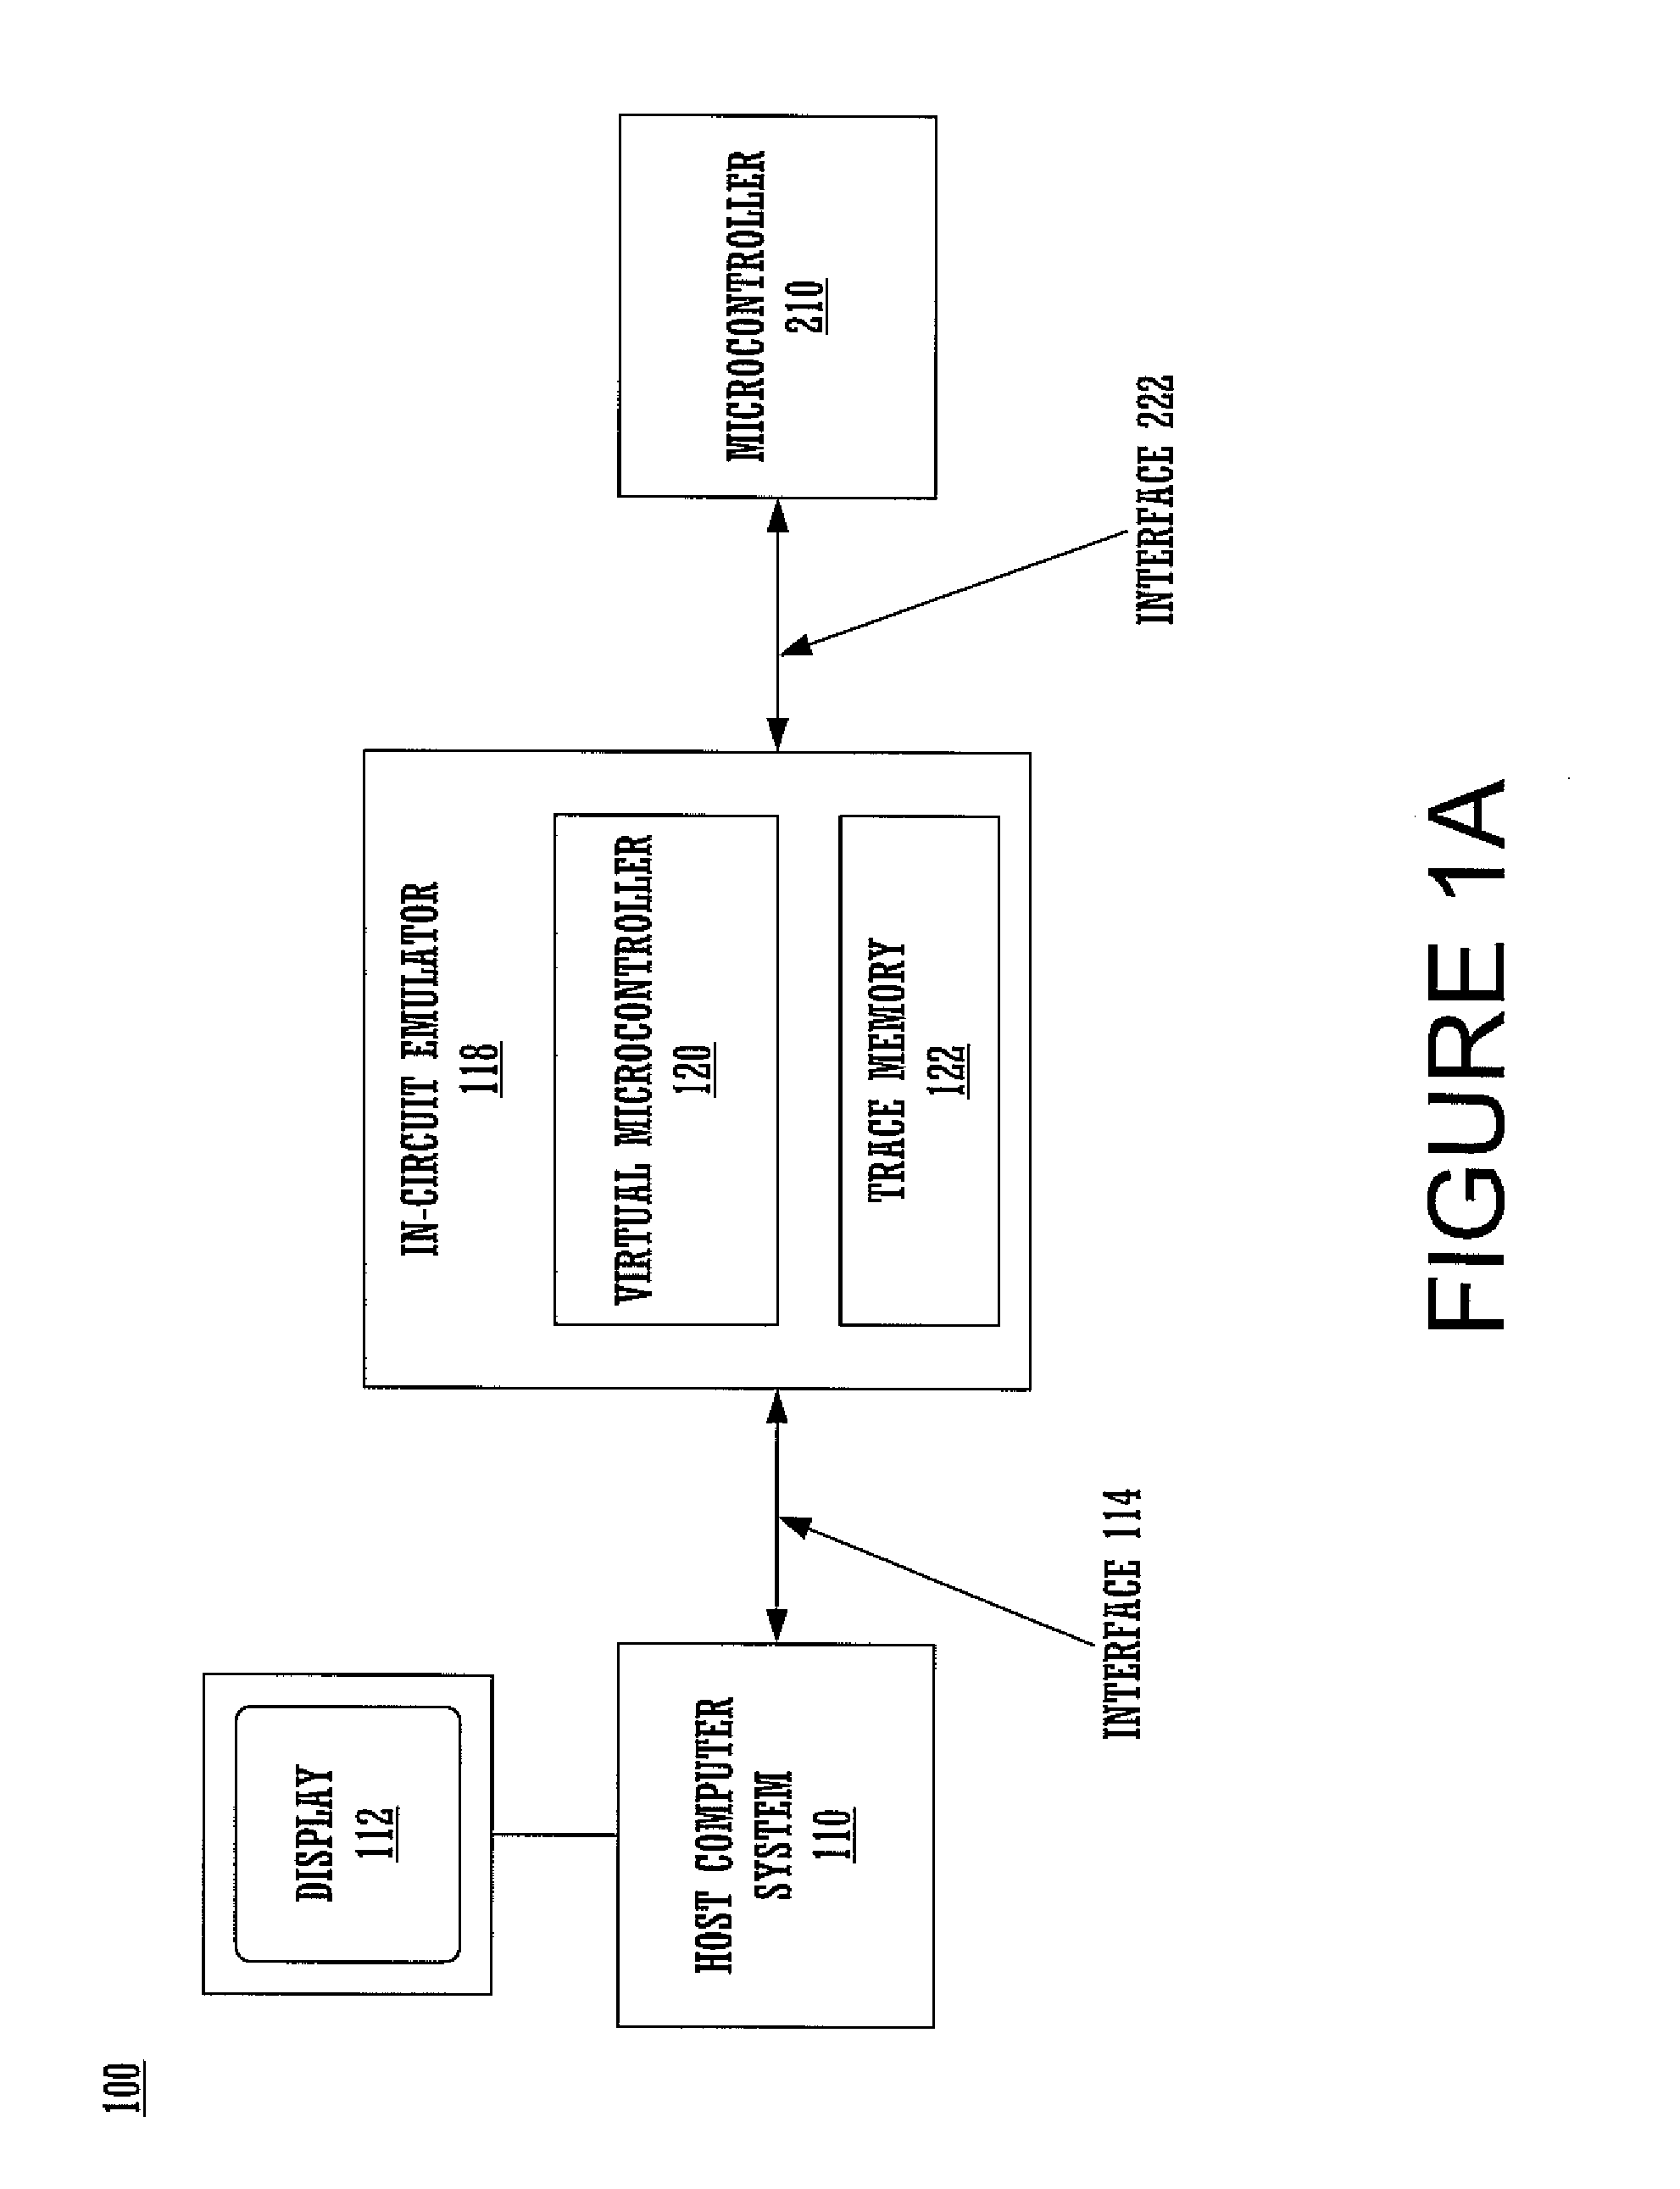 Method for integrating event-related information and trace information